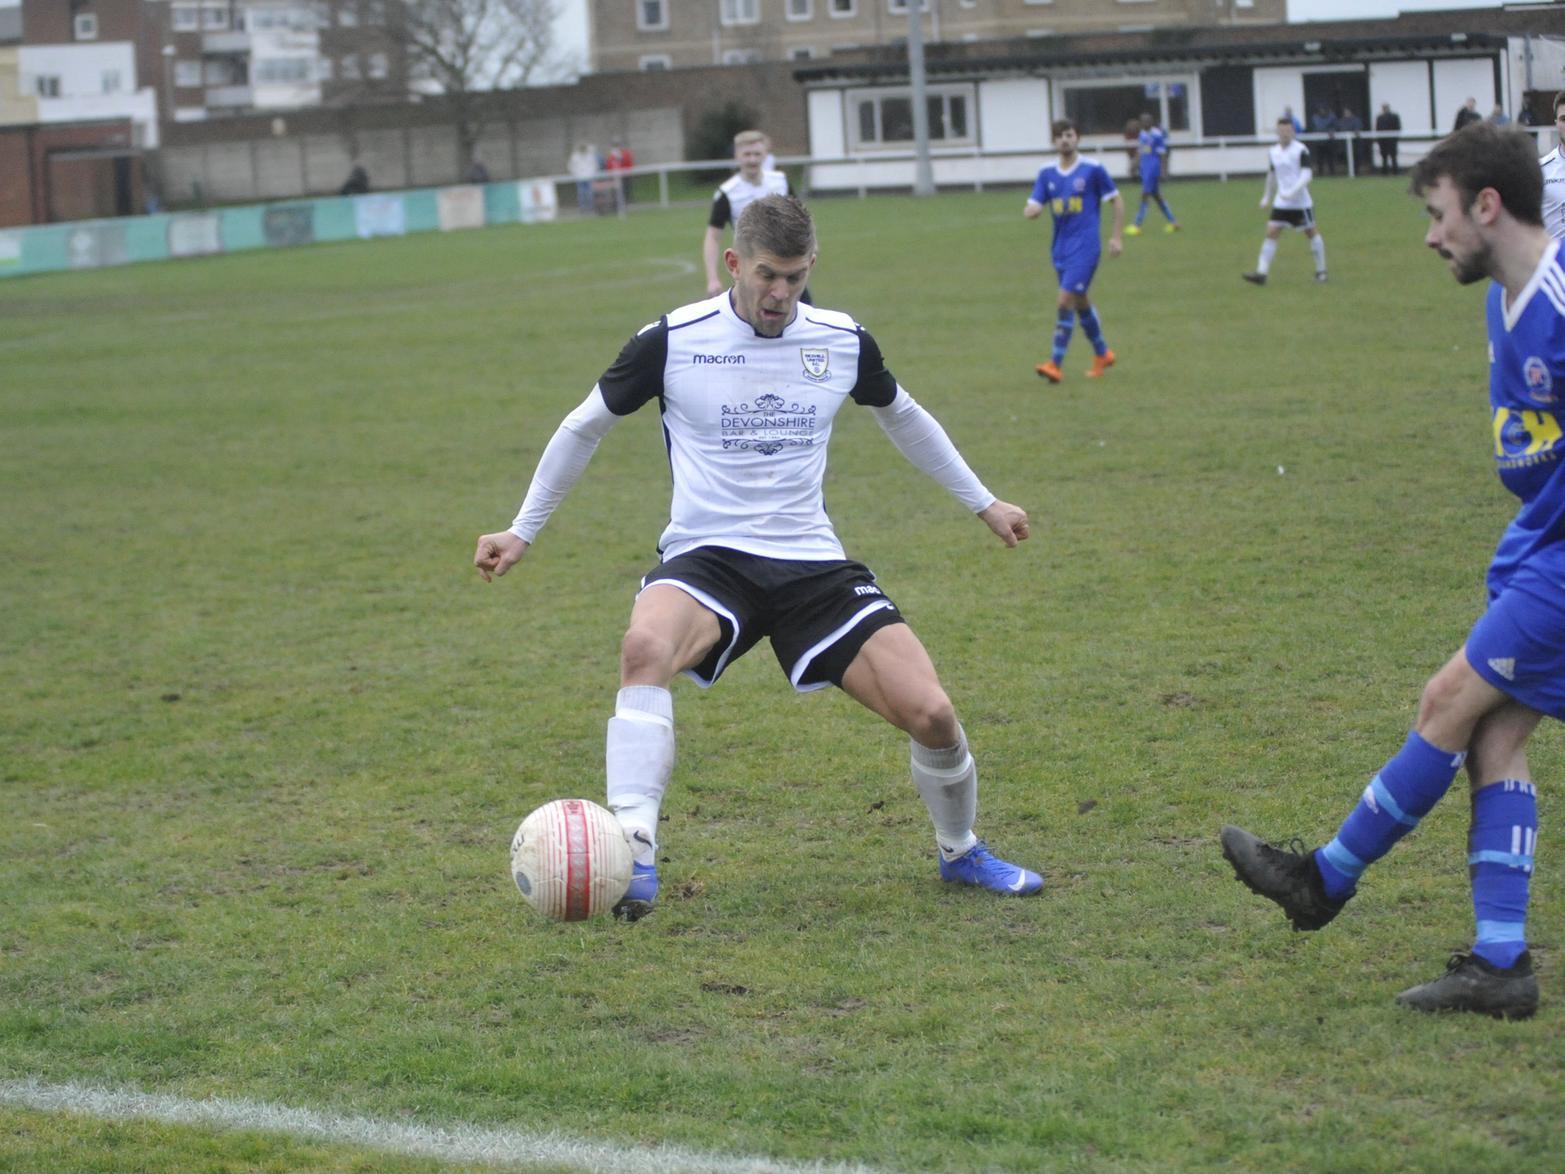 Jack Shonk (Bexhill United)